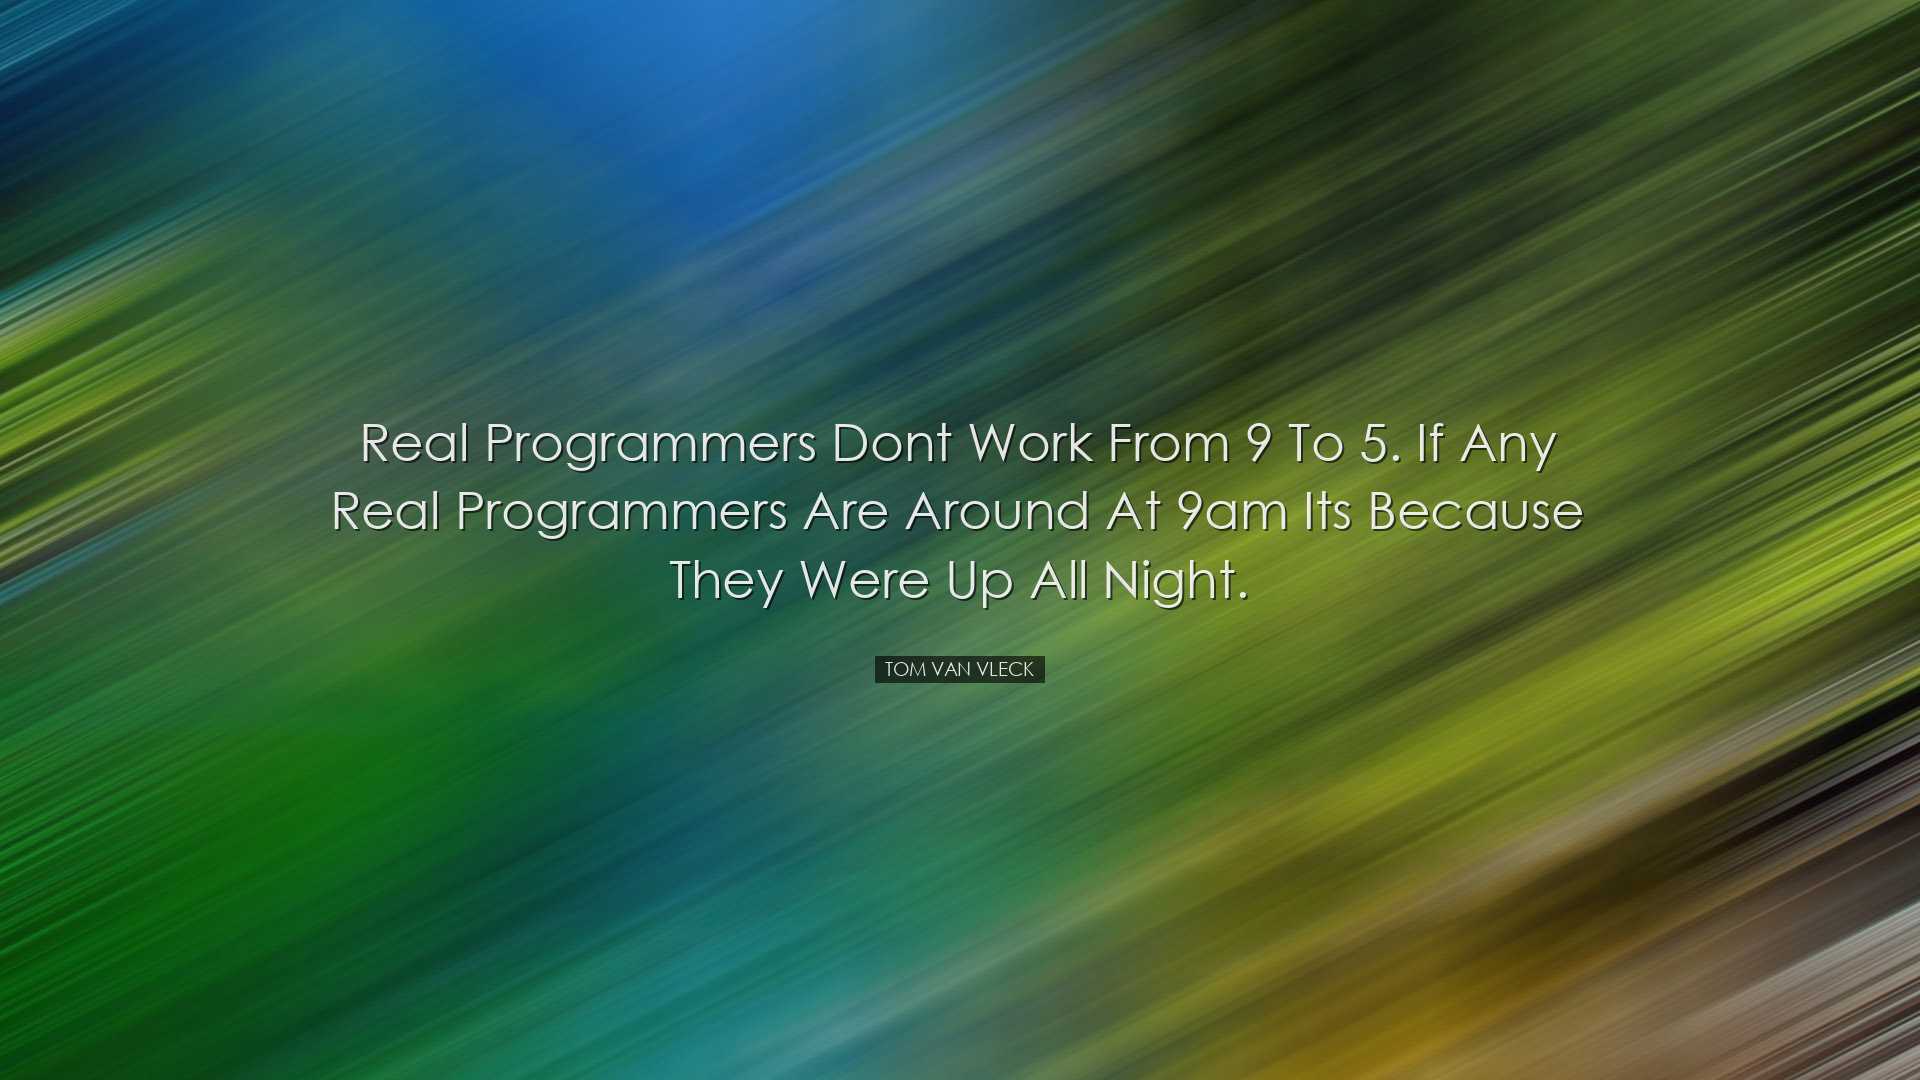 Real programmers dont work from 9 to 5. If any real programmers ar